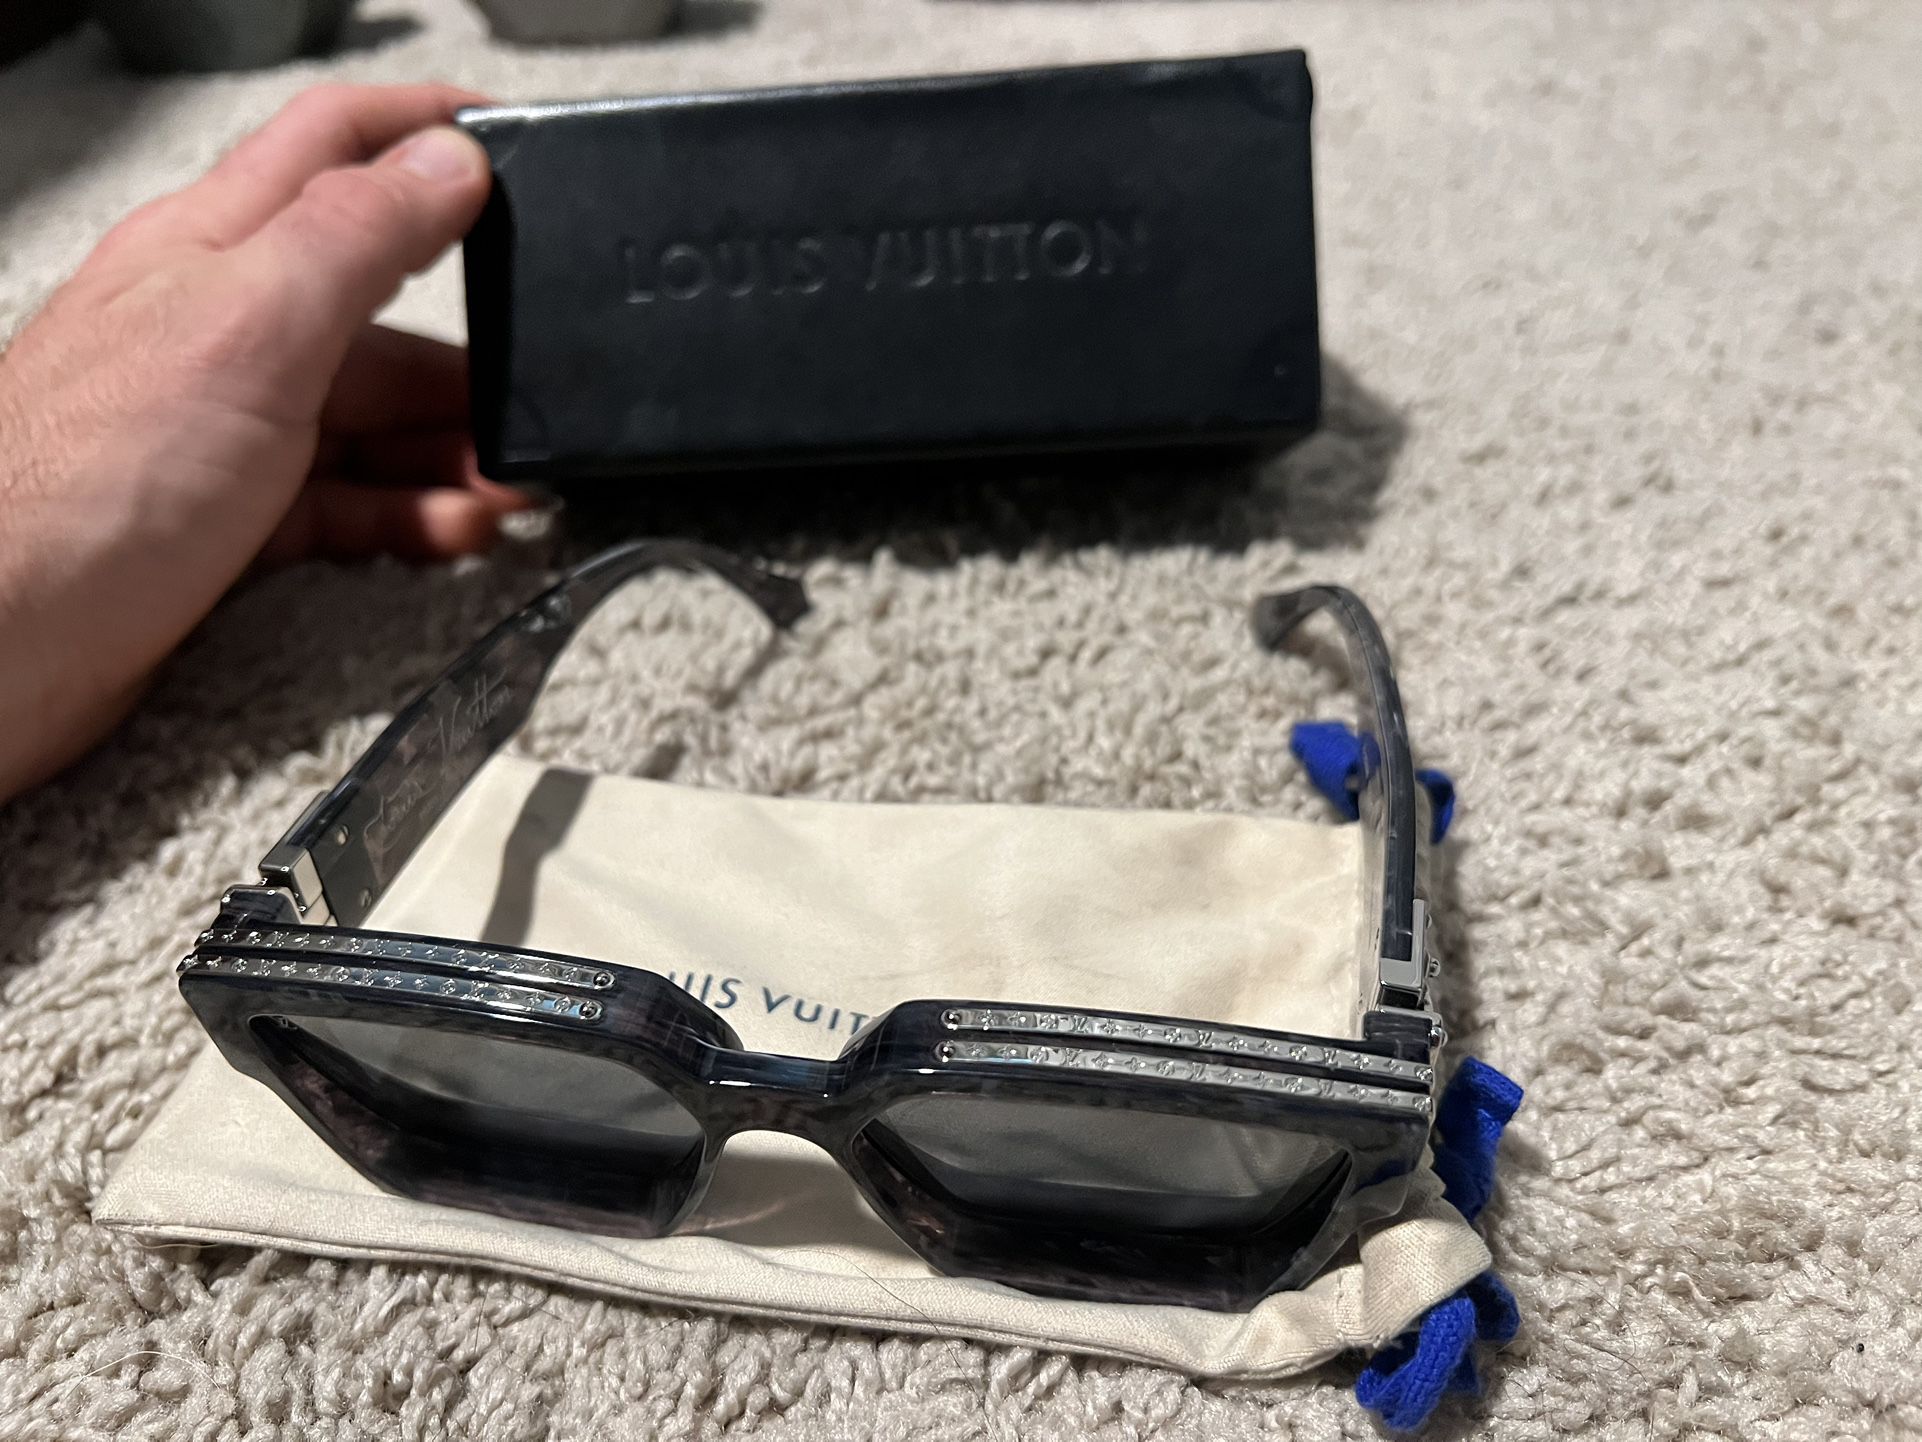 Louis Vuitton XL Sunglasses Clear for Sale in Omaha, NE - OfferUp